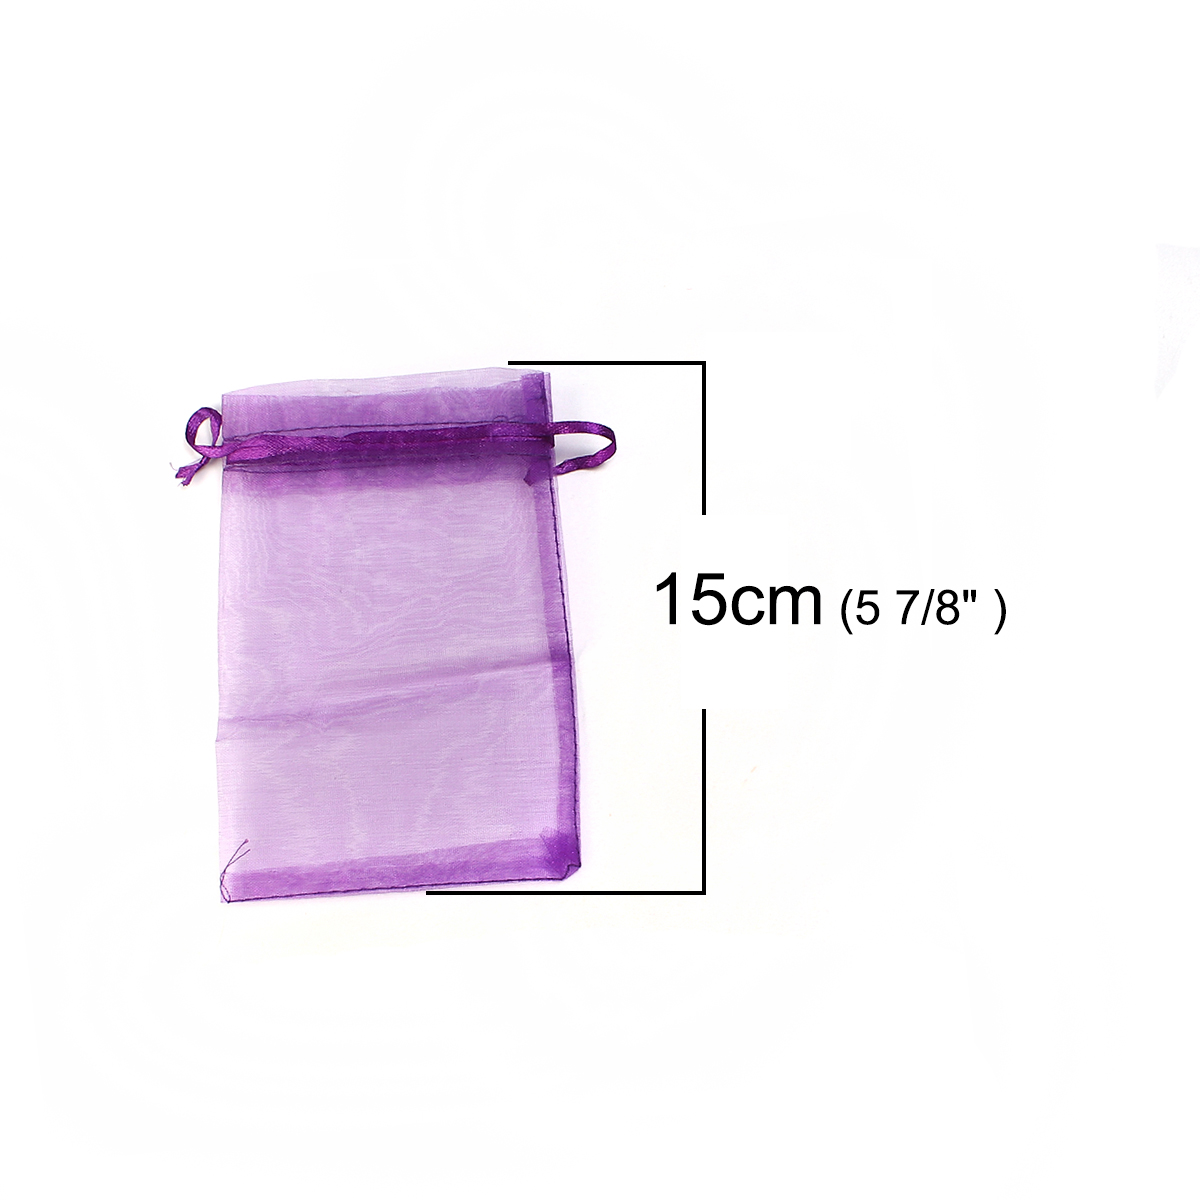 Picture of Wedding Gift Organza Jewelry Bags Drawstring Rectangle Dark Purple (Usable Space: 13x10cm) 15cm(5 7/8") x 10cm(3 7/8"), 20 PCs